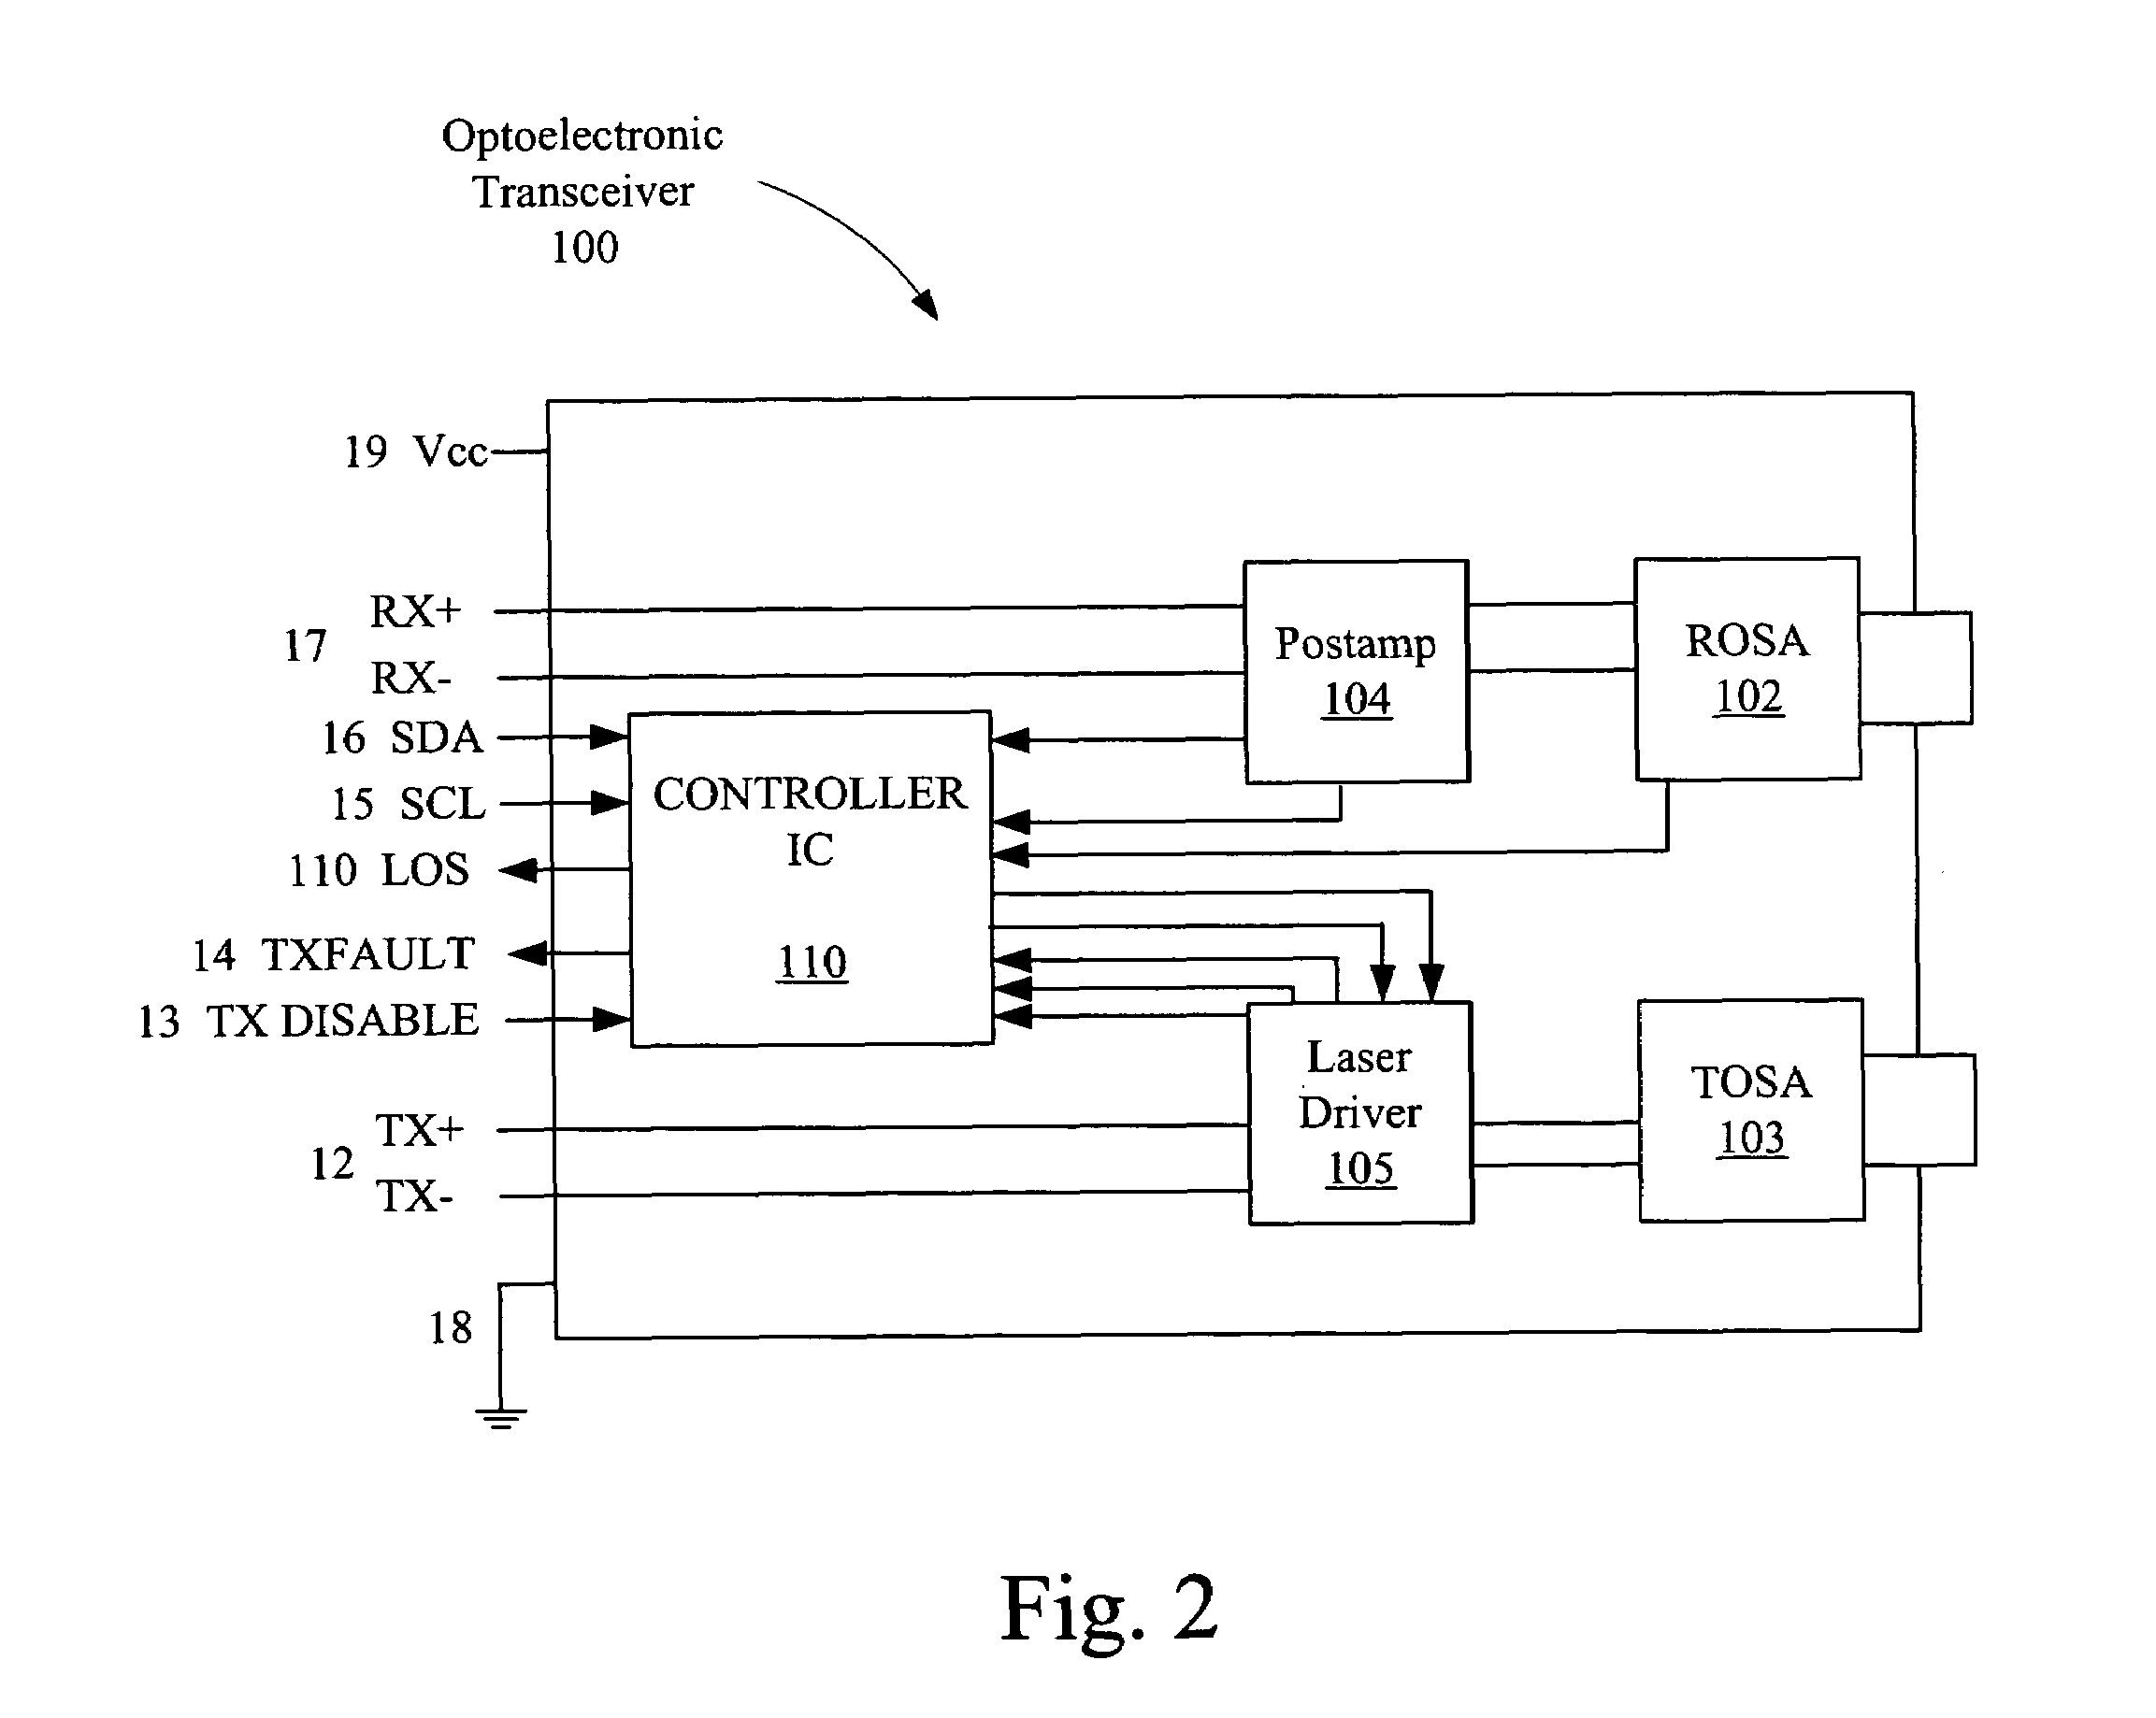 Optical transceiver and host adapter with memory mapped monitoring circuitry